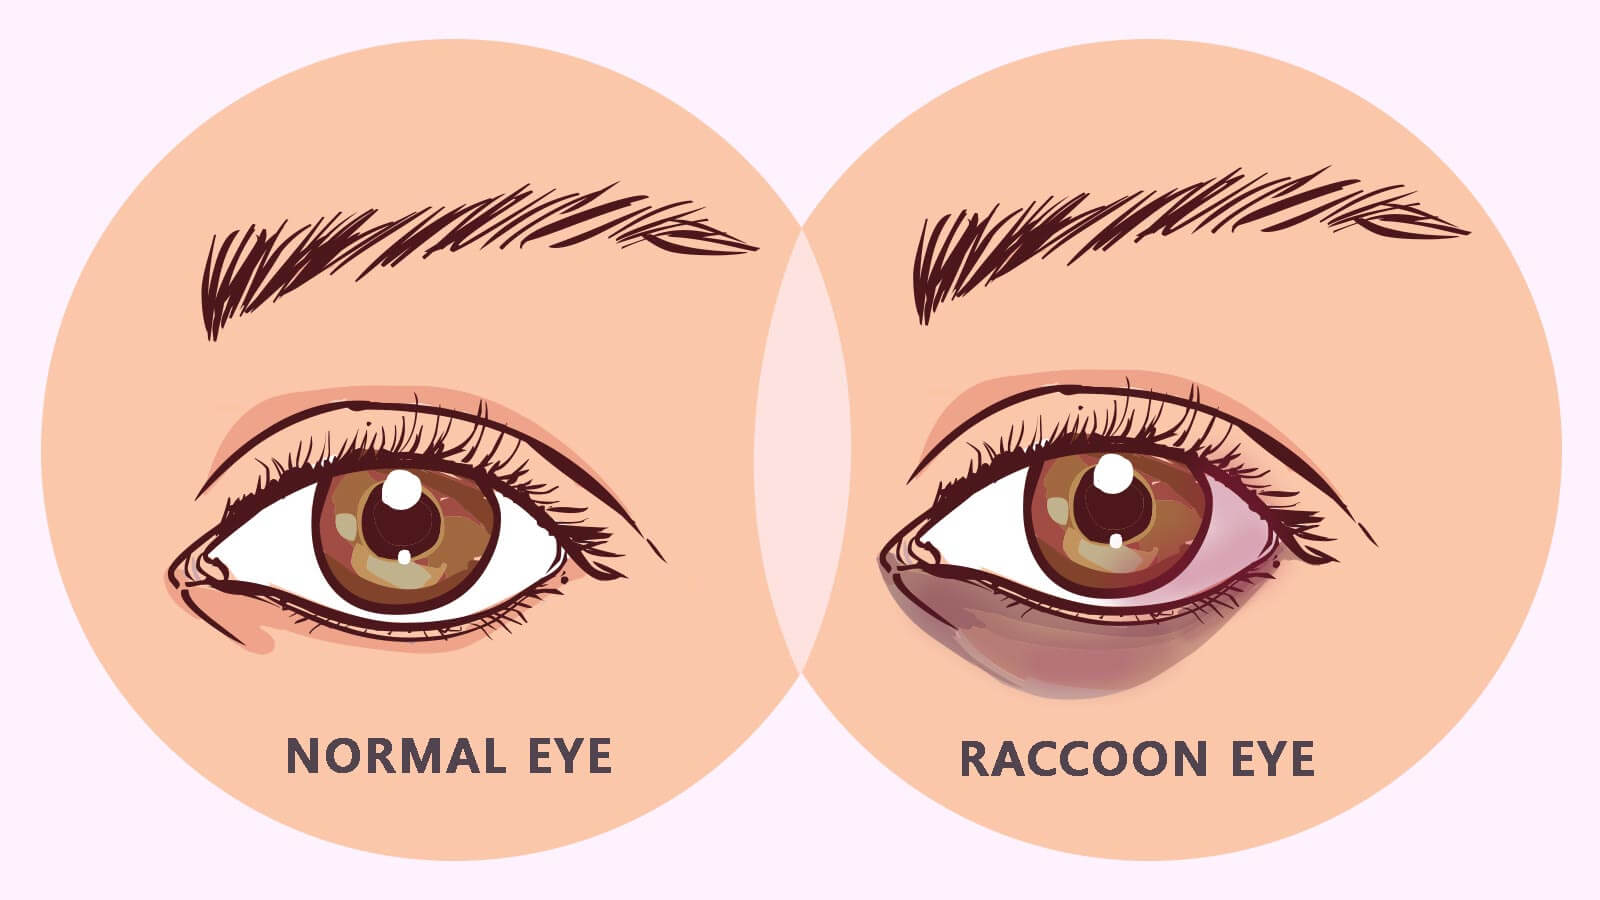 Getting to Know Everything About the Raccoon Eyes Condition